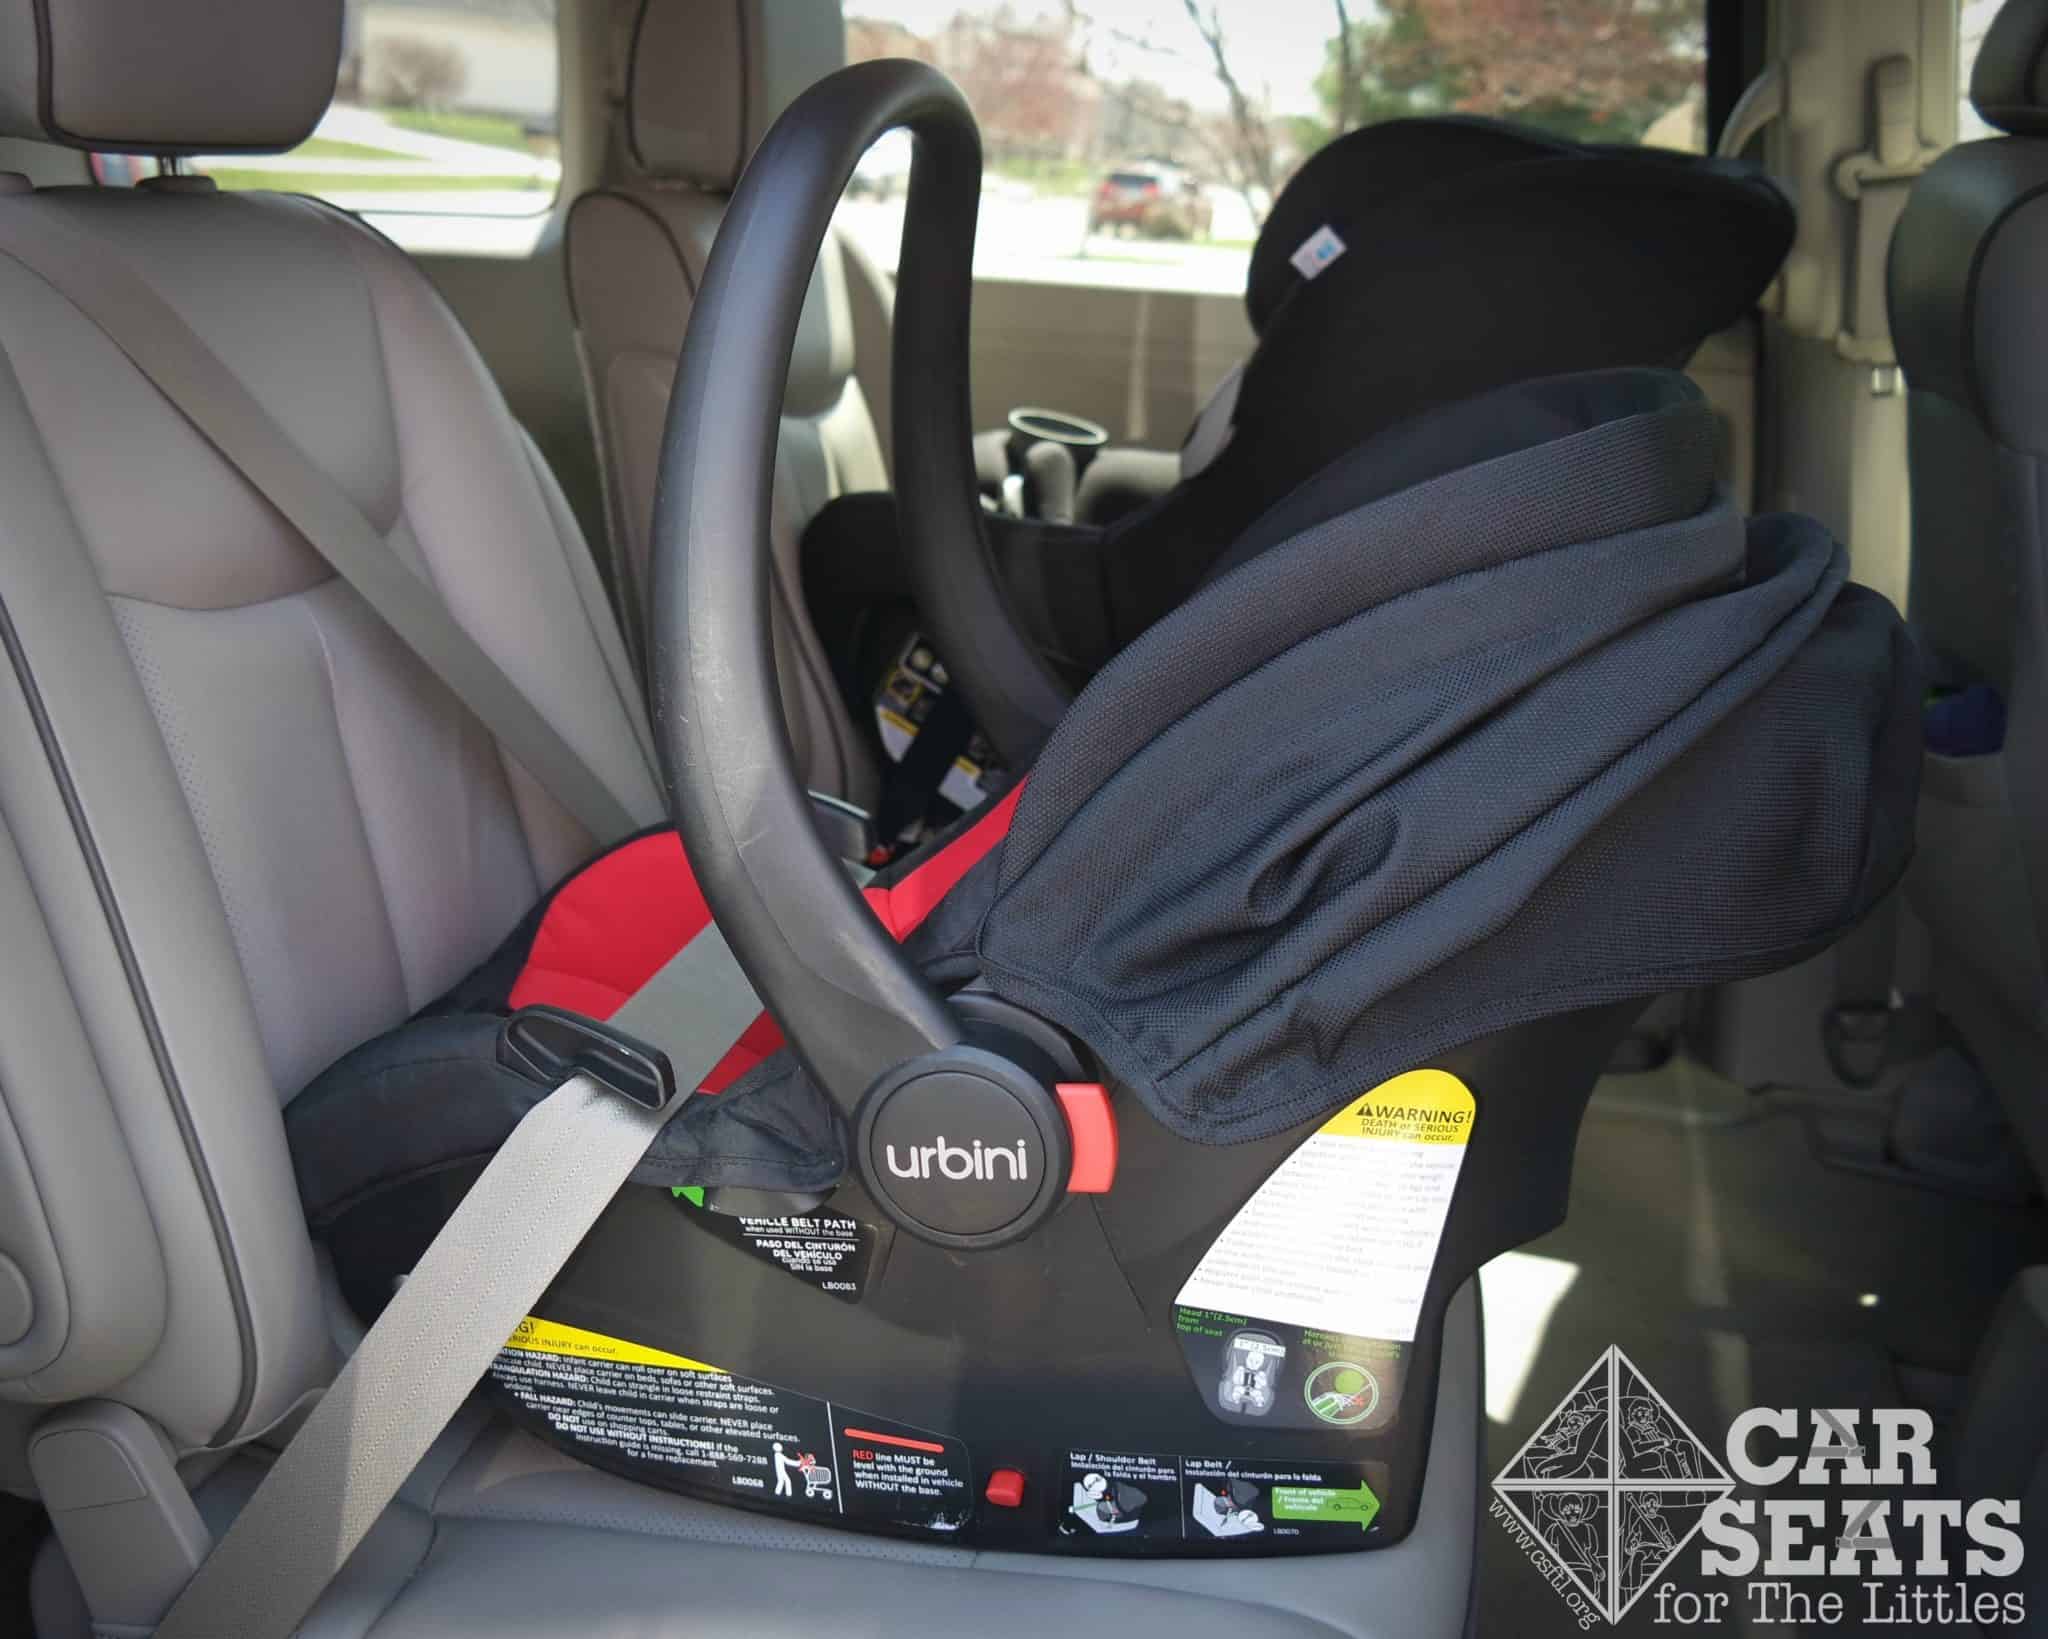 Installing A Rear Facing Only Seat Without The Base Car Seats For Littles - How To Install Graco Infant Car Seat With Seatbelt